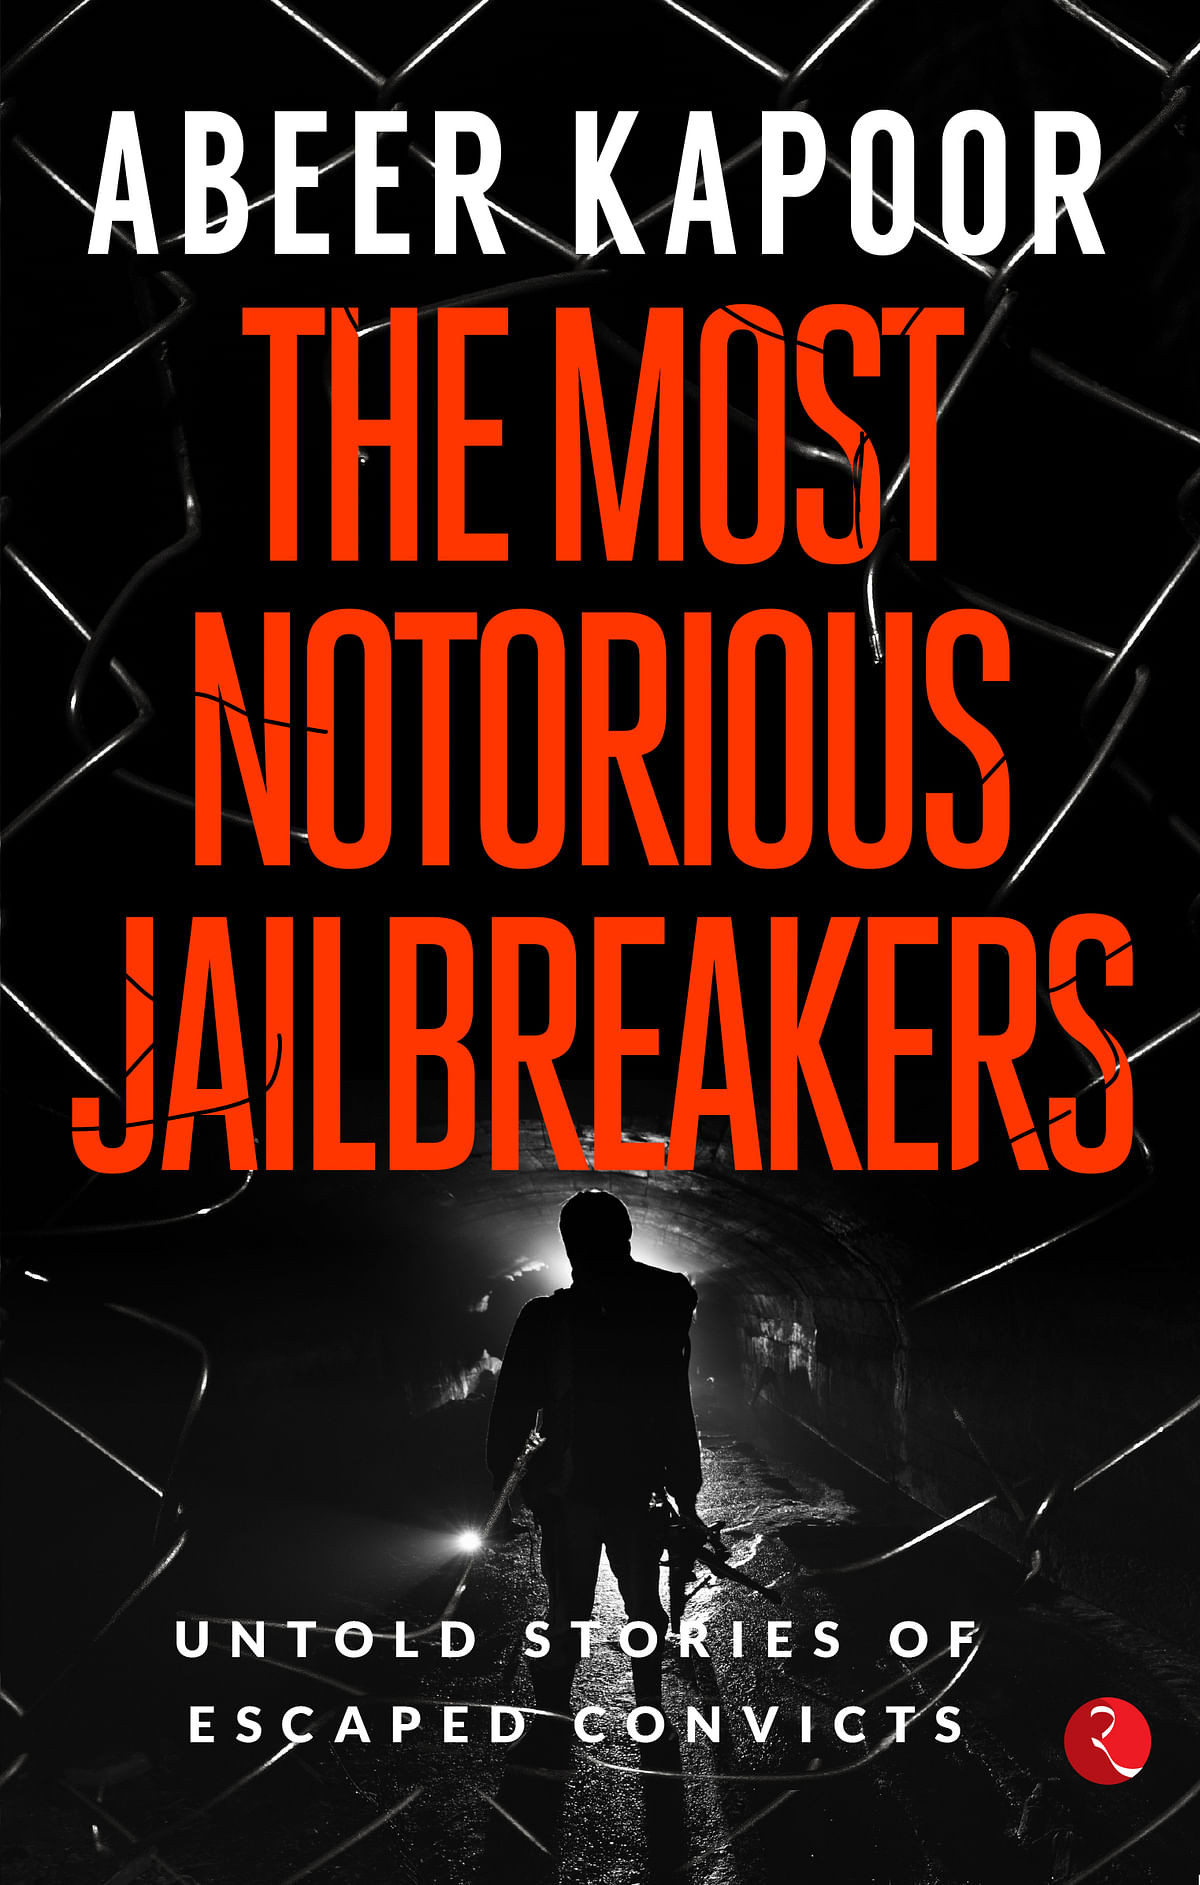 The Quint presents an excerpt from Abeer Kapoor’s book ‘The Most Notorious Jailbreakers’ (Rupa Publications India).